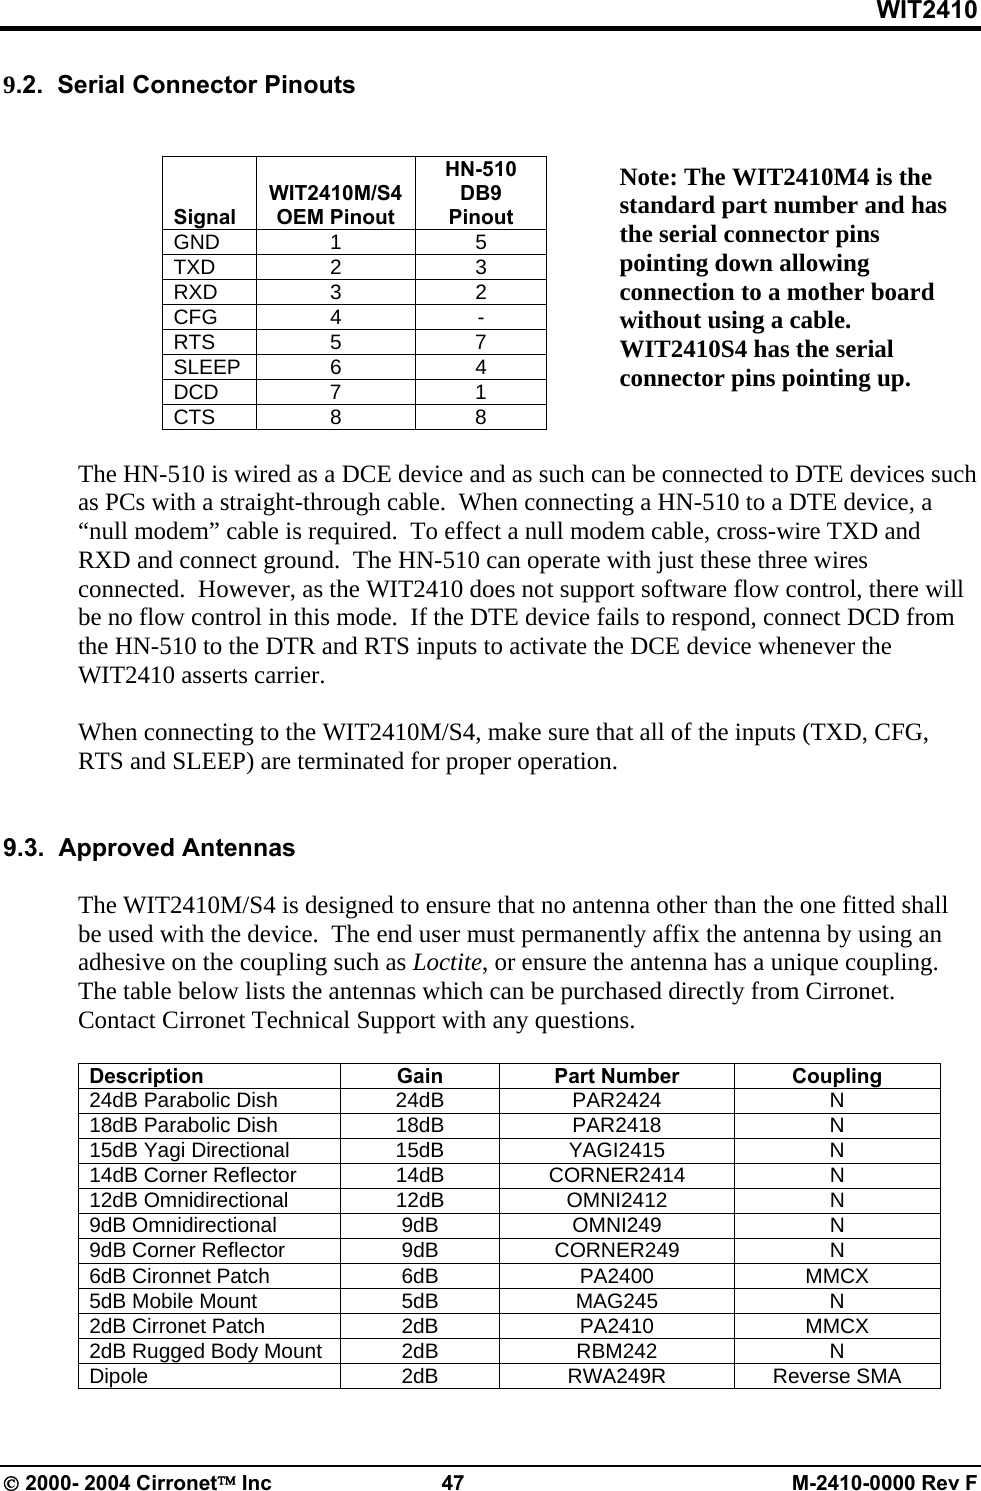 WIT2410 9.2.  Serial Connector Pinouts      Signal  WIT2410M/S4 OEM Pinout HN-510  DB9 Pinout GND 1  5 TXD 2  3 RXD 3  2 CFG 4  - RTS 5  7 SLEEP 6  4 DCD 7  1 CTS 8  8 Note: The WIT2410M4 is the standard part number and has the serial connector pins pointing down allowing connection to a mother board without using a cable. WIT2410S4 has the serial connector pins pointing up.  The HN-510 is wired as a DCE device and as such can be connected to DTE devices such as PCs with a straight-through cable.  When connecting a HN-510 to a DTE device, a “null modem” cable is required.  To effect a null modem cable, cross-wire TXD and RXD and connect ground.  The HN-510 can operate with just these three wires connected.  However, as the WIT2410 does not support software flow control, there will be no flow control in this mode.  If the DTE device fails to respond, connect DCD from the HN-510 to the DTR and RTS inputs to activate the DCE device whenever the WIT2410 asserts carrier.    When connecting to the WIT2410M/S4, make sure that all of the inputs (TXD, CFG, RTS and SLEEP) are terminated for proper operation.   9.3.  Approved Antennas  The WIT2410M/S4 is designed to ensure that no antenna other than the one fitted shall be used with the device.  The end user must permanently affix the antenna by using an adhesive on the coupling such as Loctite, or ensure the antenna has a unique coupling. The table below lists the antennas which can be purchased directly from Cirronet.  Contact Cirronet Technical Support with any questions.  Description Gain Part Number Coupling 24dB Parabolic Dish  24dB  PAR2424  N 18dB Parabolic Dish  18dB  PAR2418  N 15dB Yagi Directional  15dB  YAGI2415  N 14dB Corner Reflector  14dB  CORNER2414  N 12dB Omnidirectional  12dB  OMNI2412  N 9dB Omnidirectional  9dB  OMNI249  N 9dB Corner Reflector  9dB  CORNER249  N 6dB Cironnet Patch  6dB  PA2400  MMCX 5dB Mobile Mount  5dB  MAG245  N 2dB Cirronet Patch  2dB  PA2410  MMCX 2dB Rugged Body Mount  2dB  RBM242  N Dipole 2dB RWA249R Reverse SMA  © 2000- 2004 Cirronet™ Inc  47  M-2410-0000 Rev F 